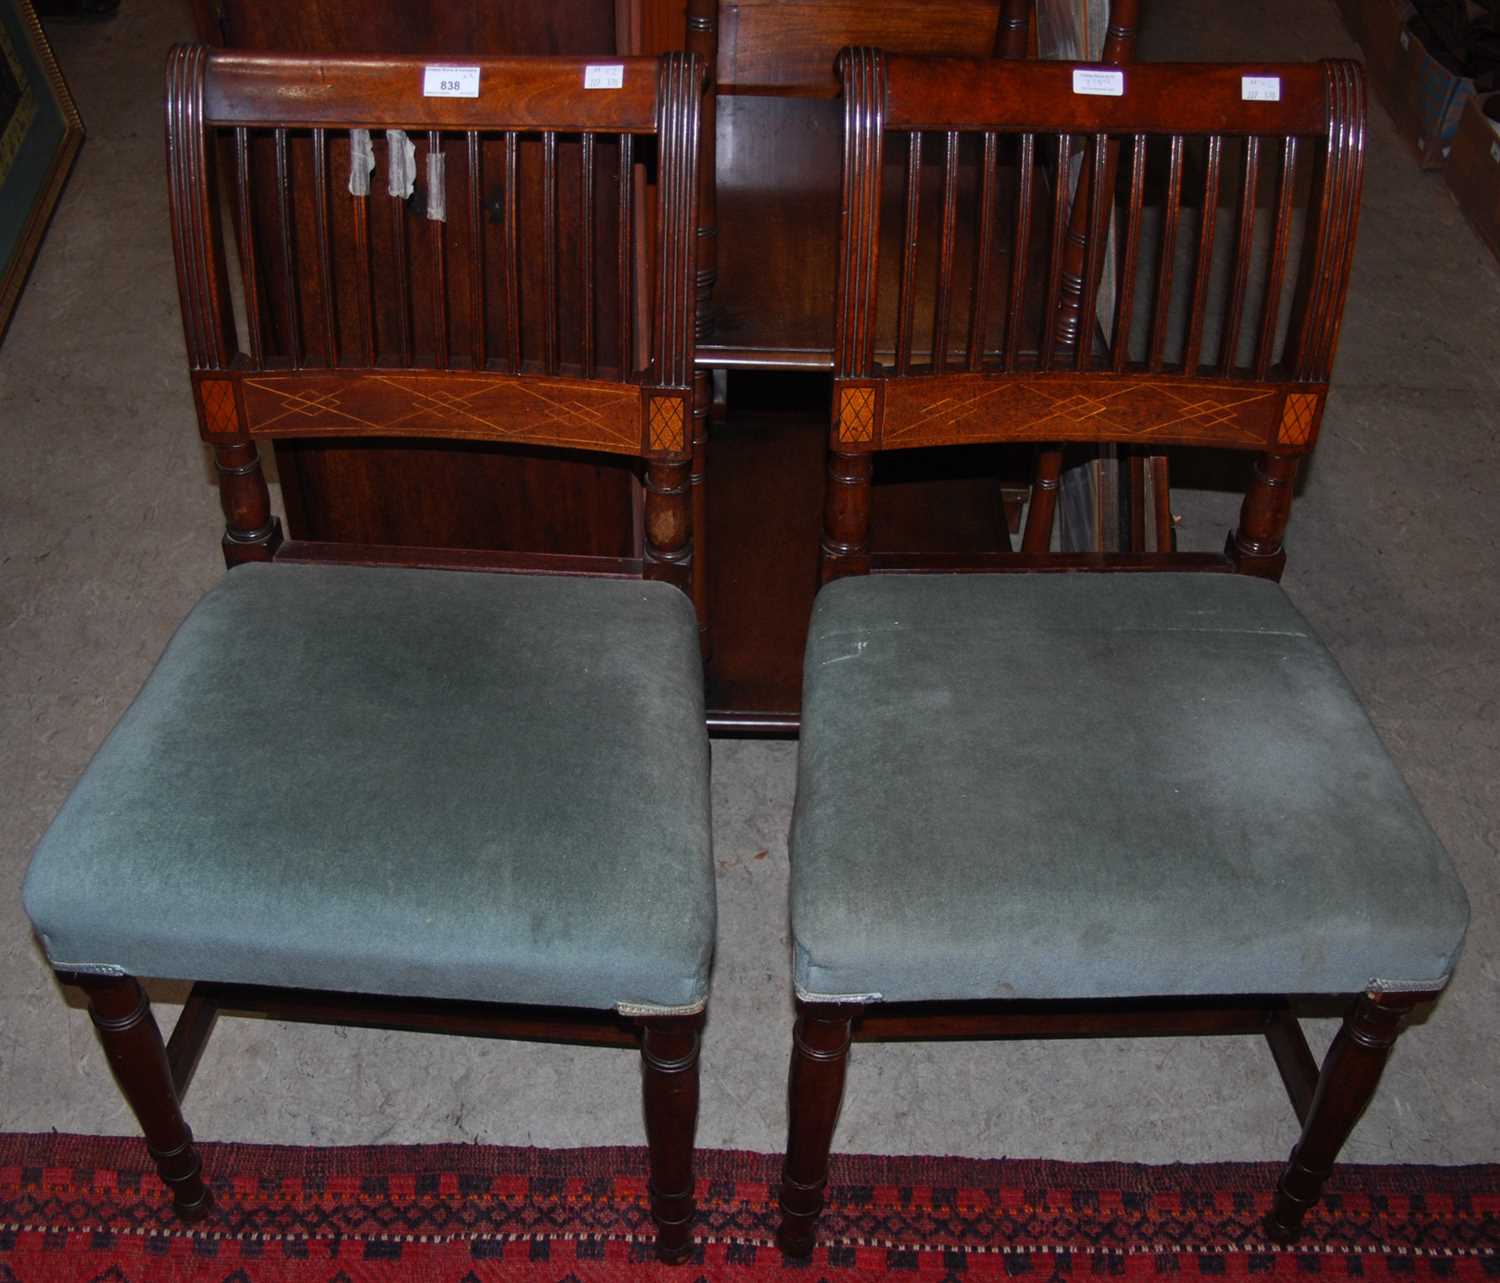 A pair of 19th century mahogany and inlaid bedroom chairs with blue velvet upholstered seats.